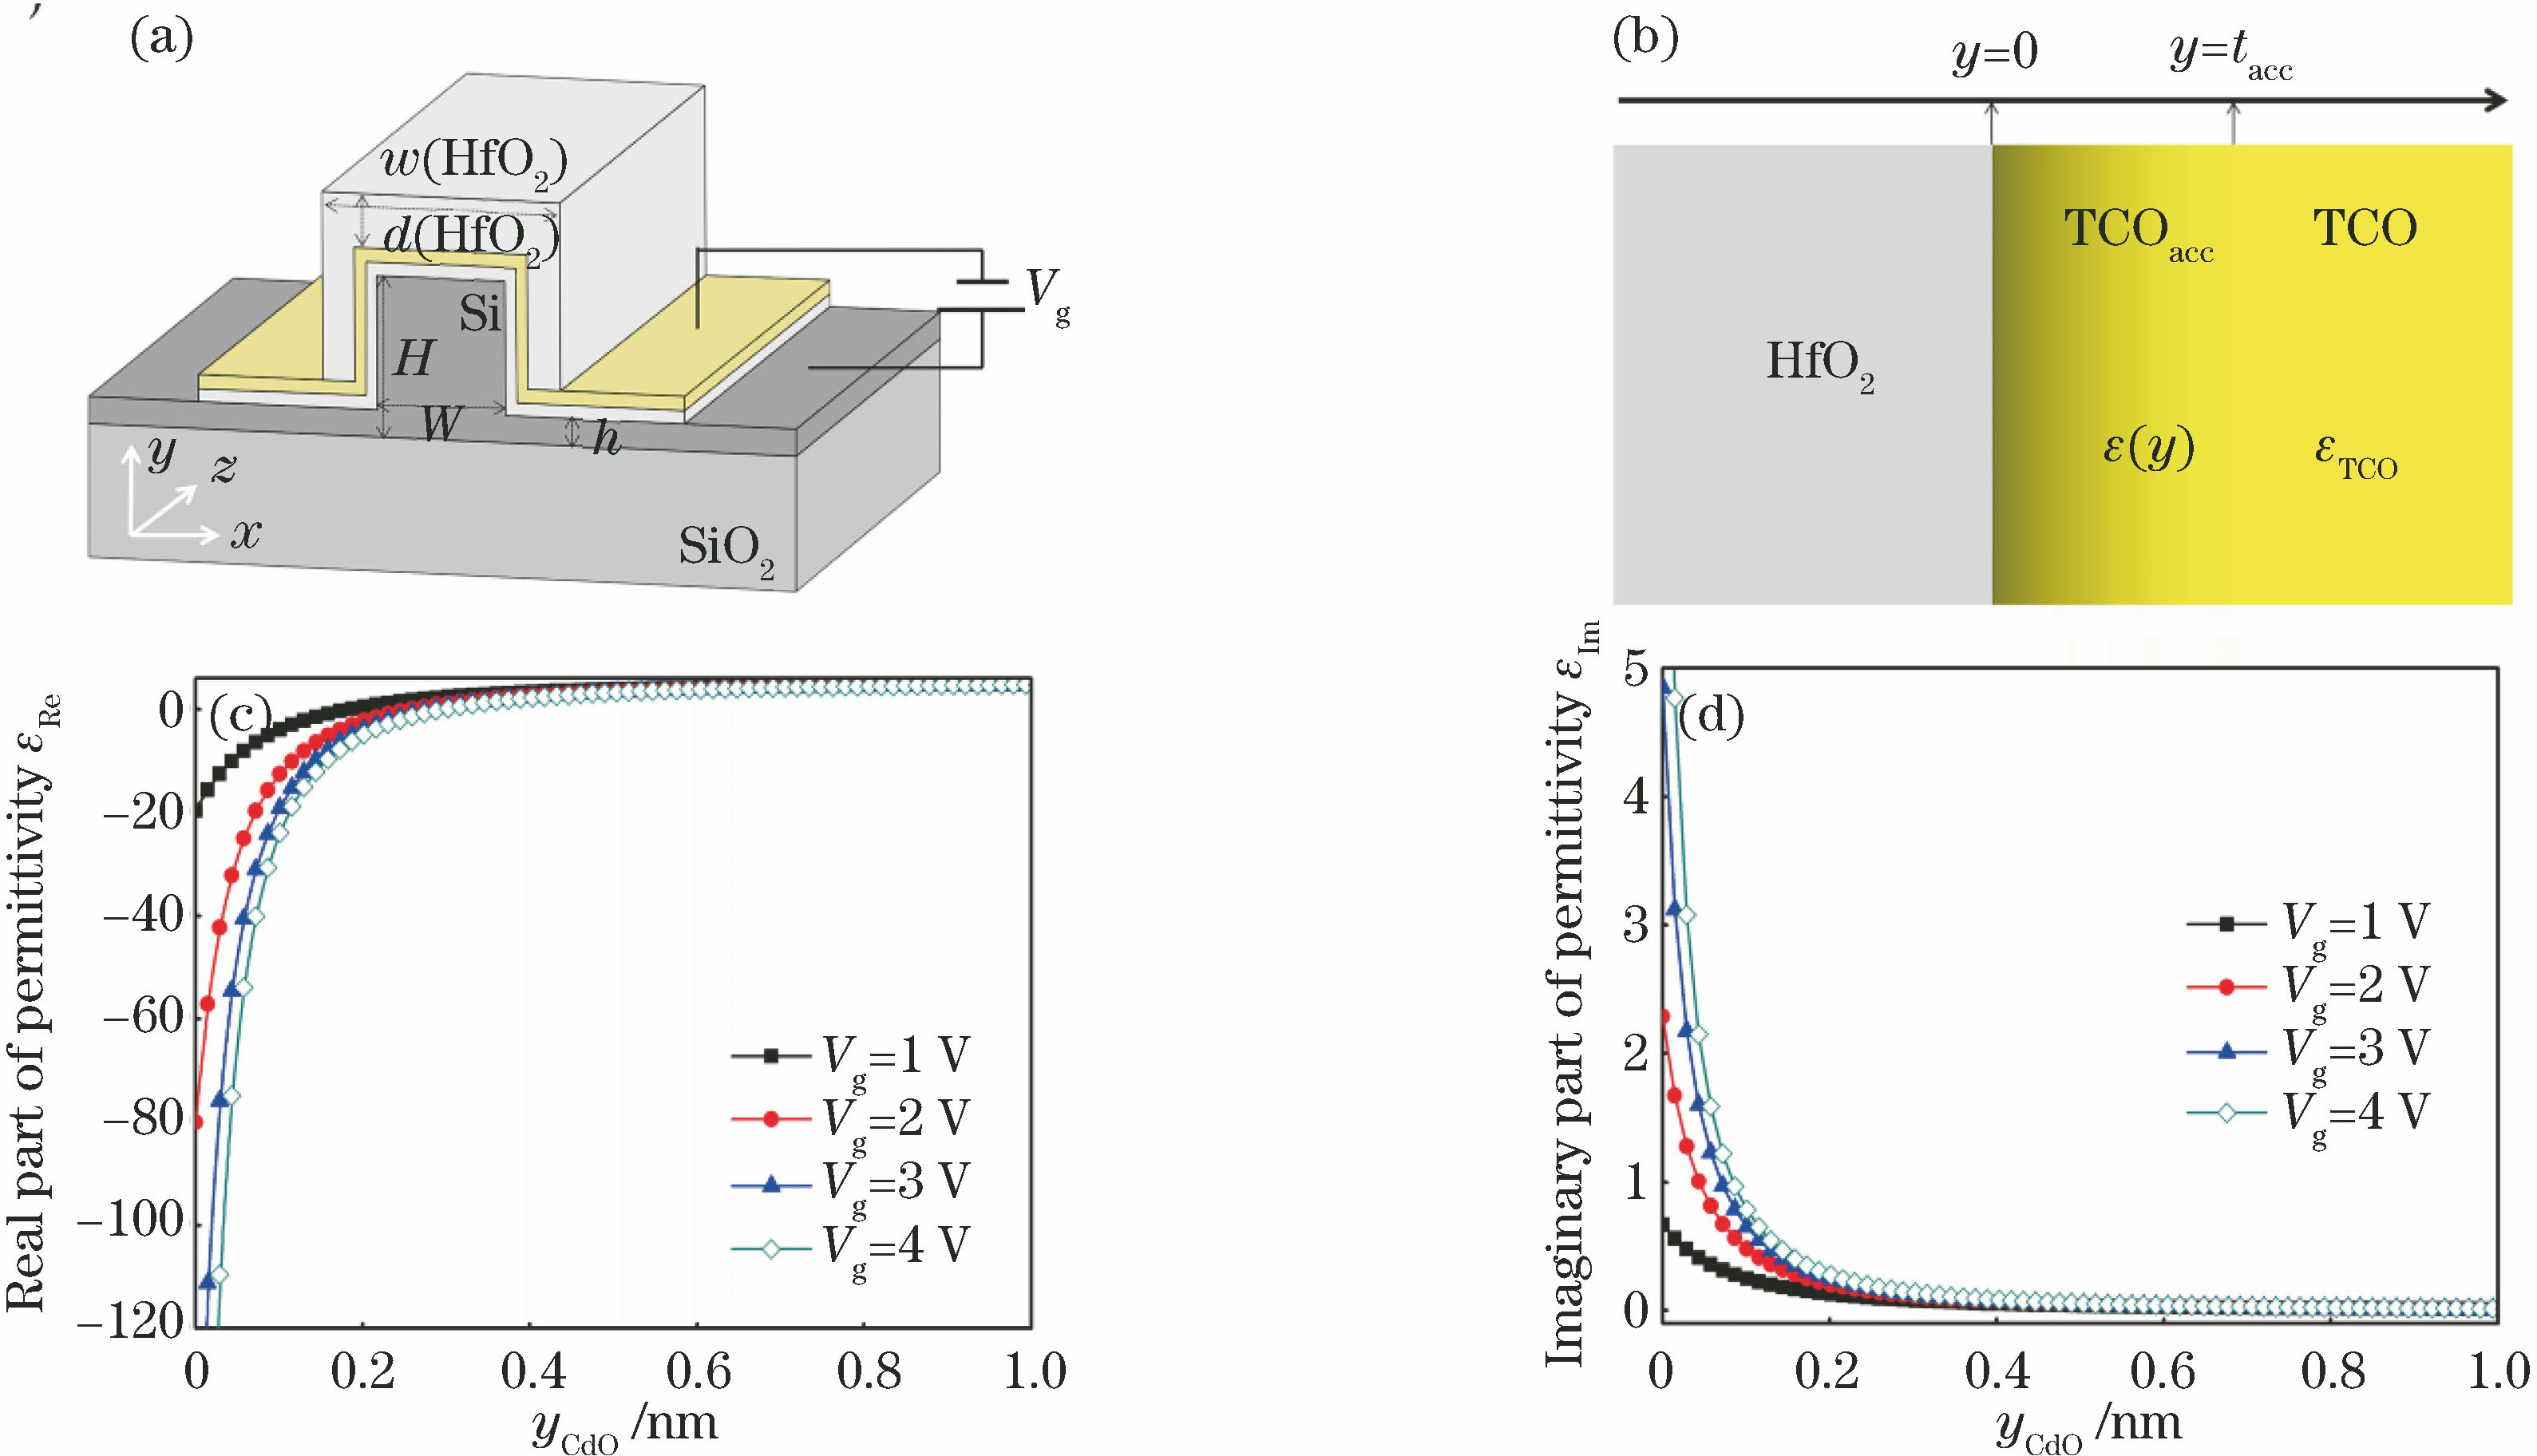 Silicon-based optical waveguide phase shifter. (a) Structure of proposed TCO-based optical waveguide phase shifter; (b) permittivity distribution of HfO2/TCO interface; (c) real and (d) imaginary parts of permittivity on gate voltage of cross-section cumulative layer of CdO film as functions of coordinate